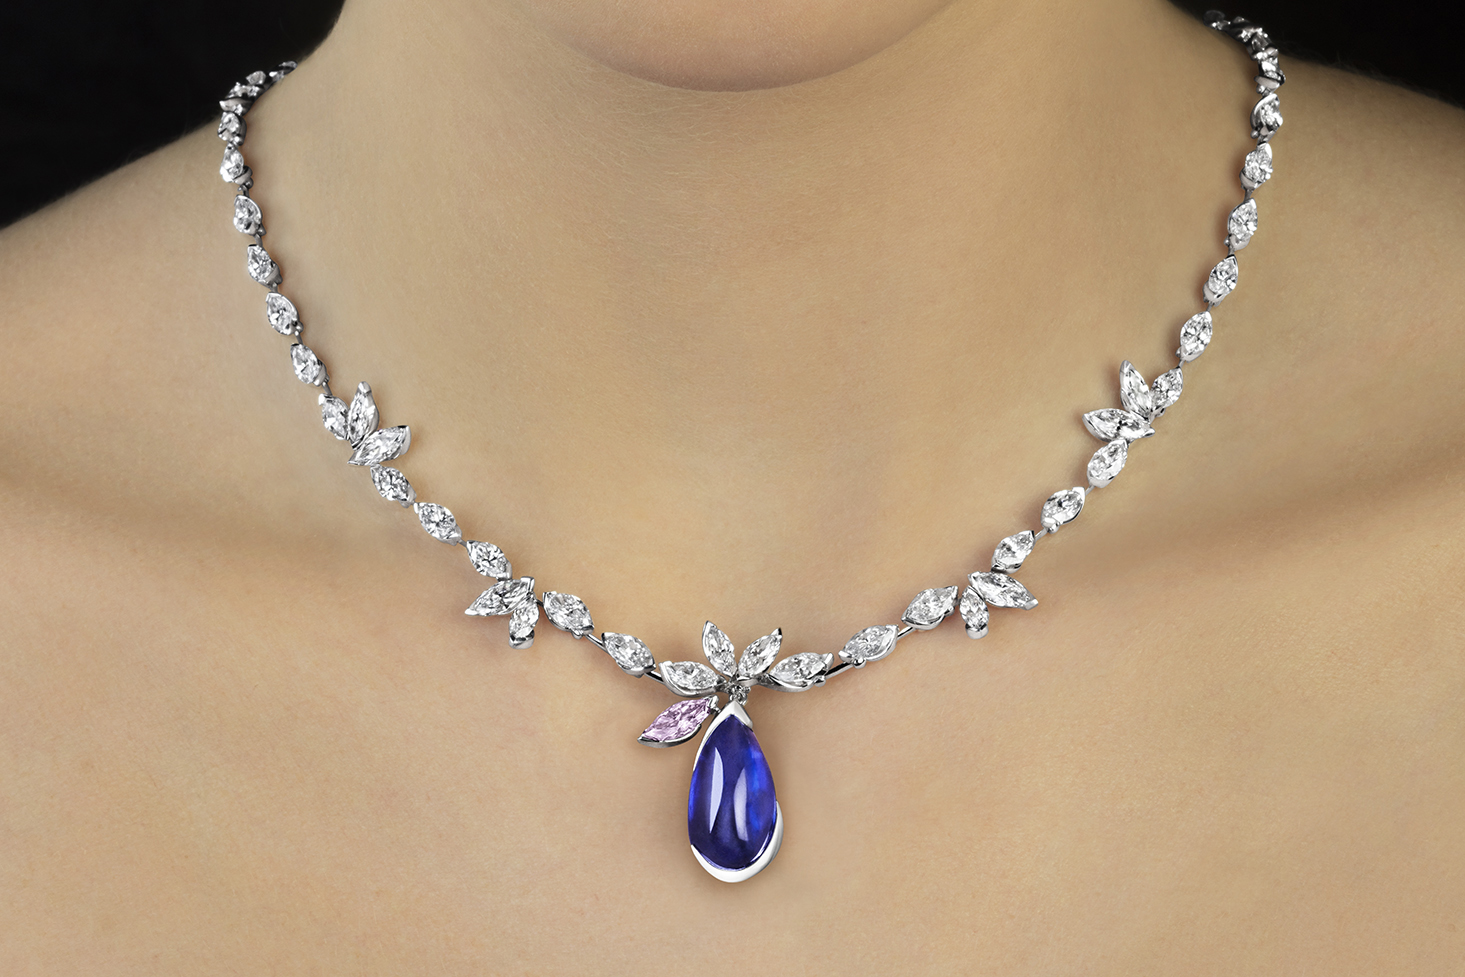 Alexandre Reza transformable necklace with removable 12.55ct Burmese pear cut cabochon sapphire on a colourless and pink diamond necklace